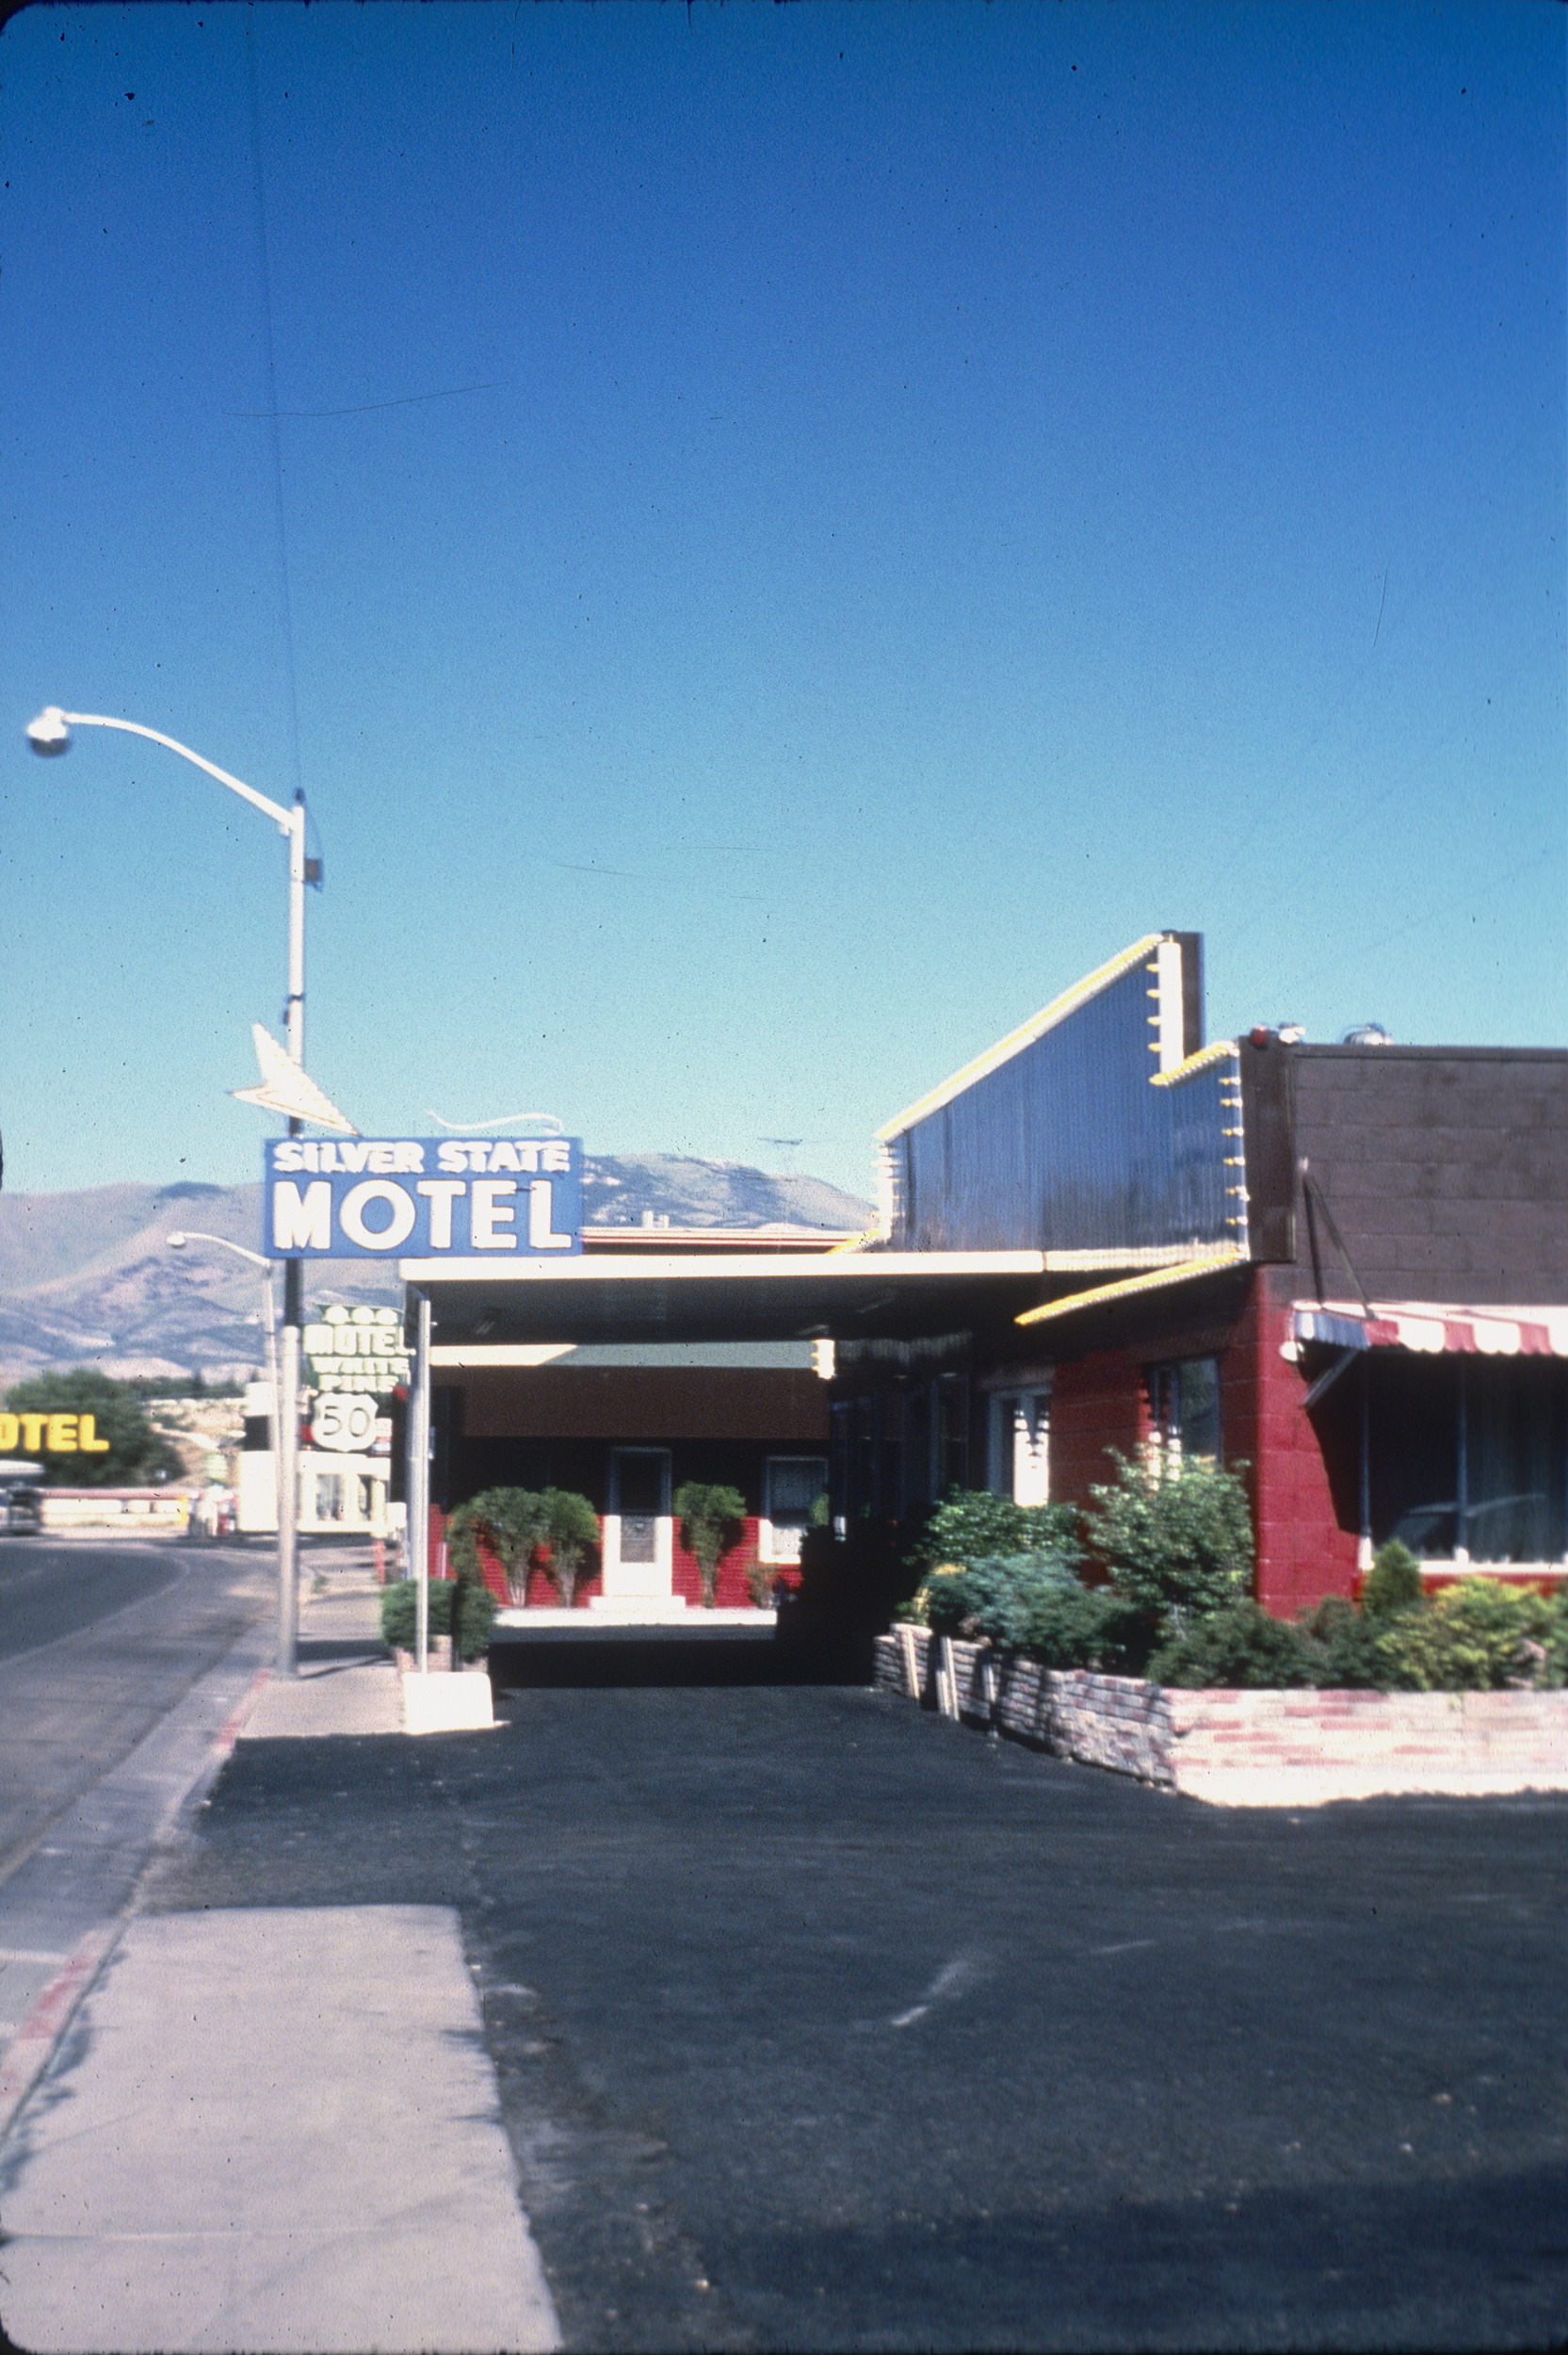 Slide of the Silver State Motel, Ely, Nevada, 1986